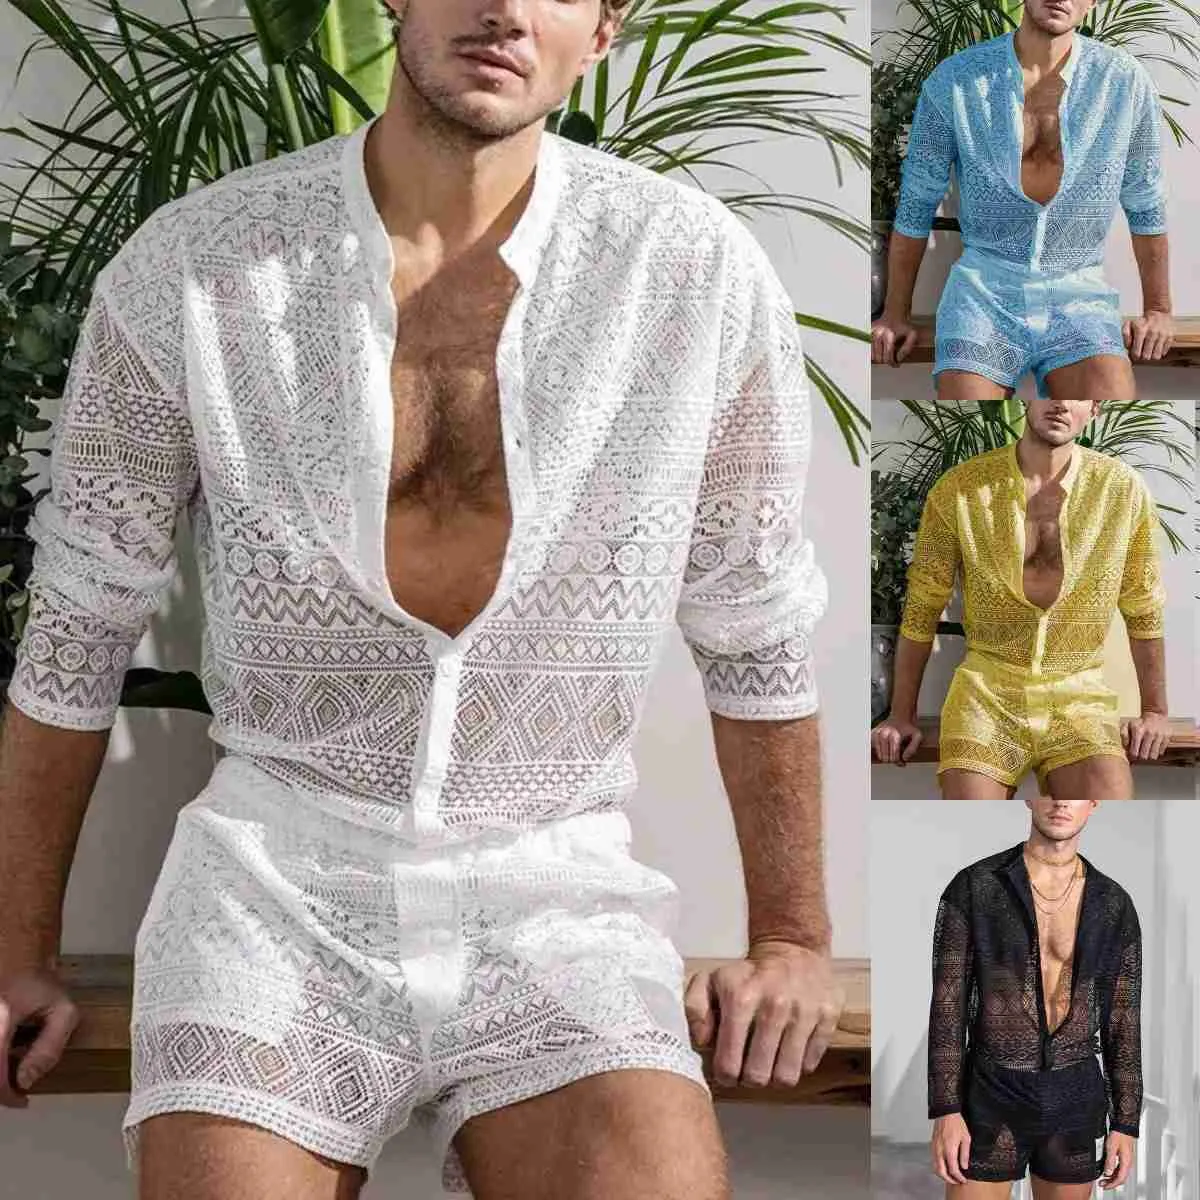 Ensemble pour hommes Sumy Sexy Lace Robe Beach Fashion Short à manches courtes Shorts courts shorts Sissy Crossy Crossdrening Pornographic Homosexuality Set 240130